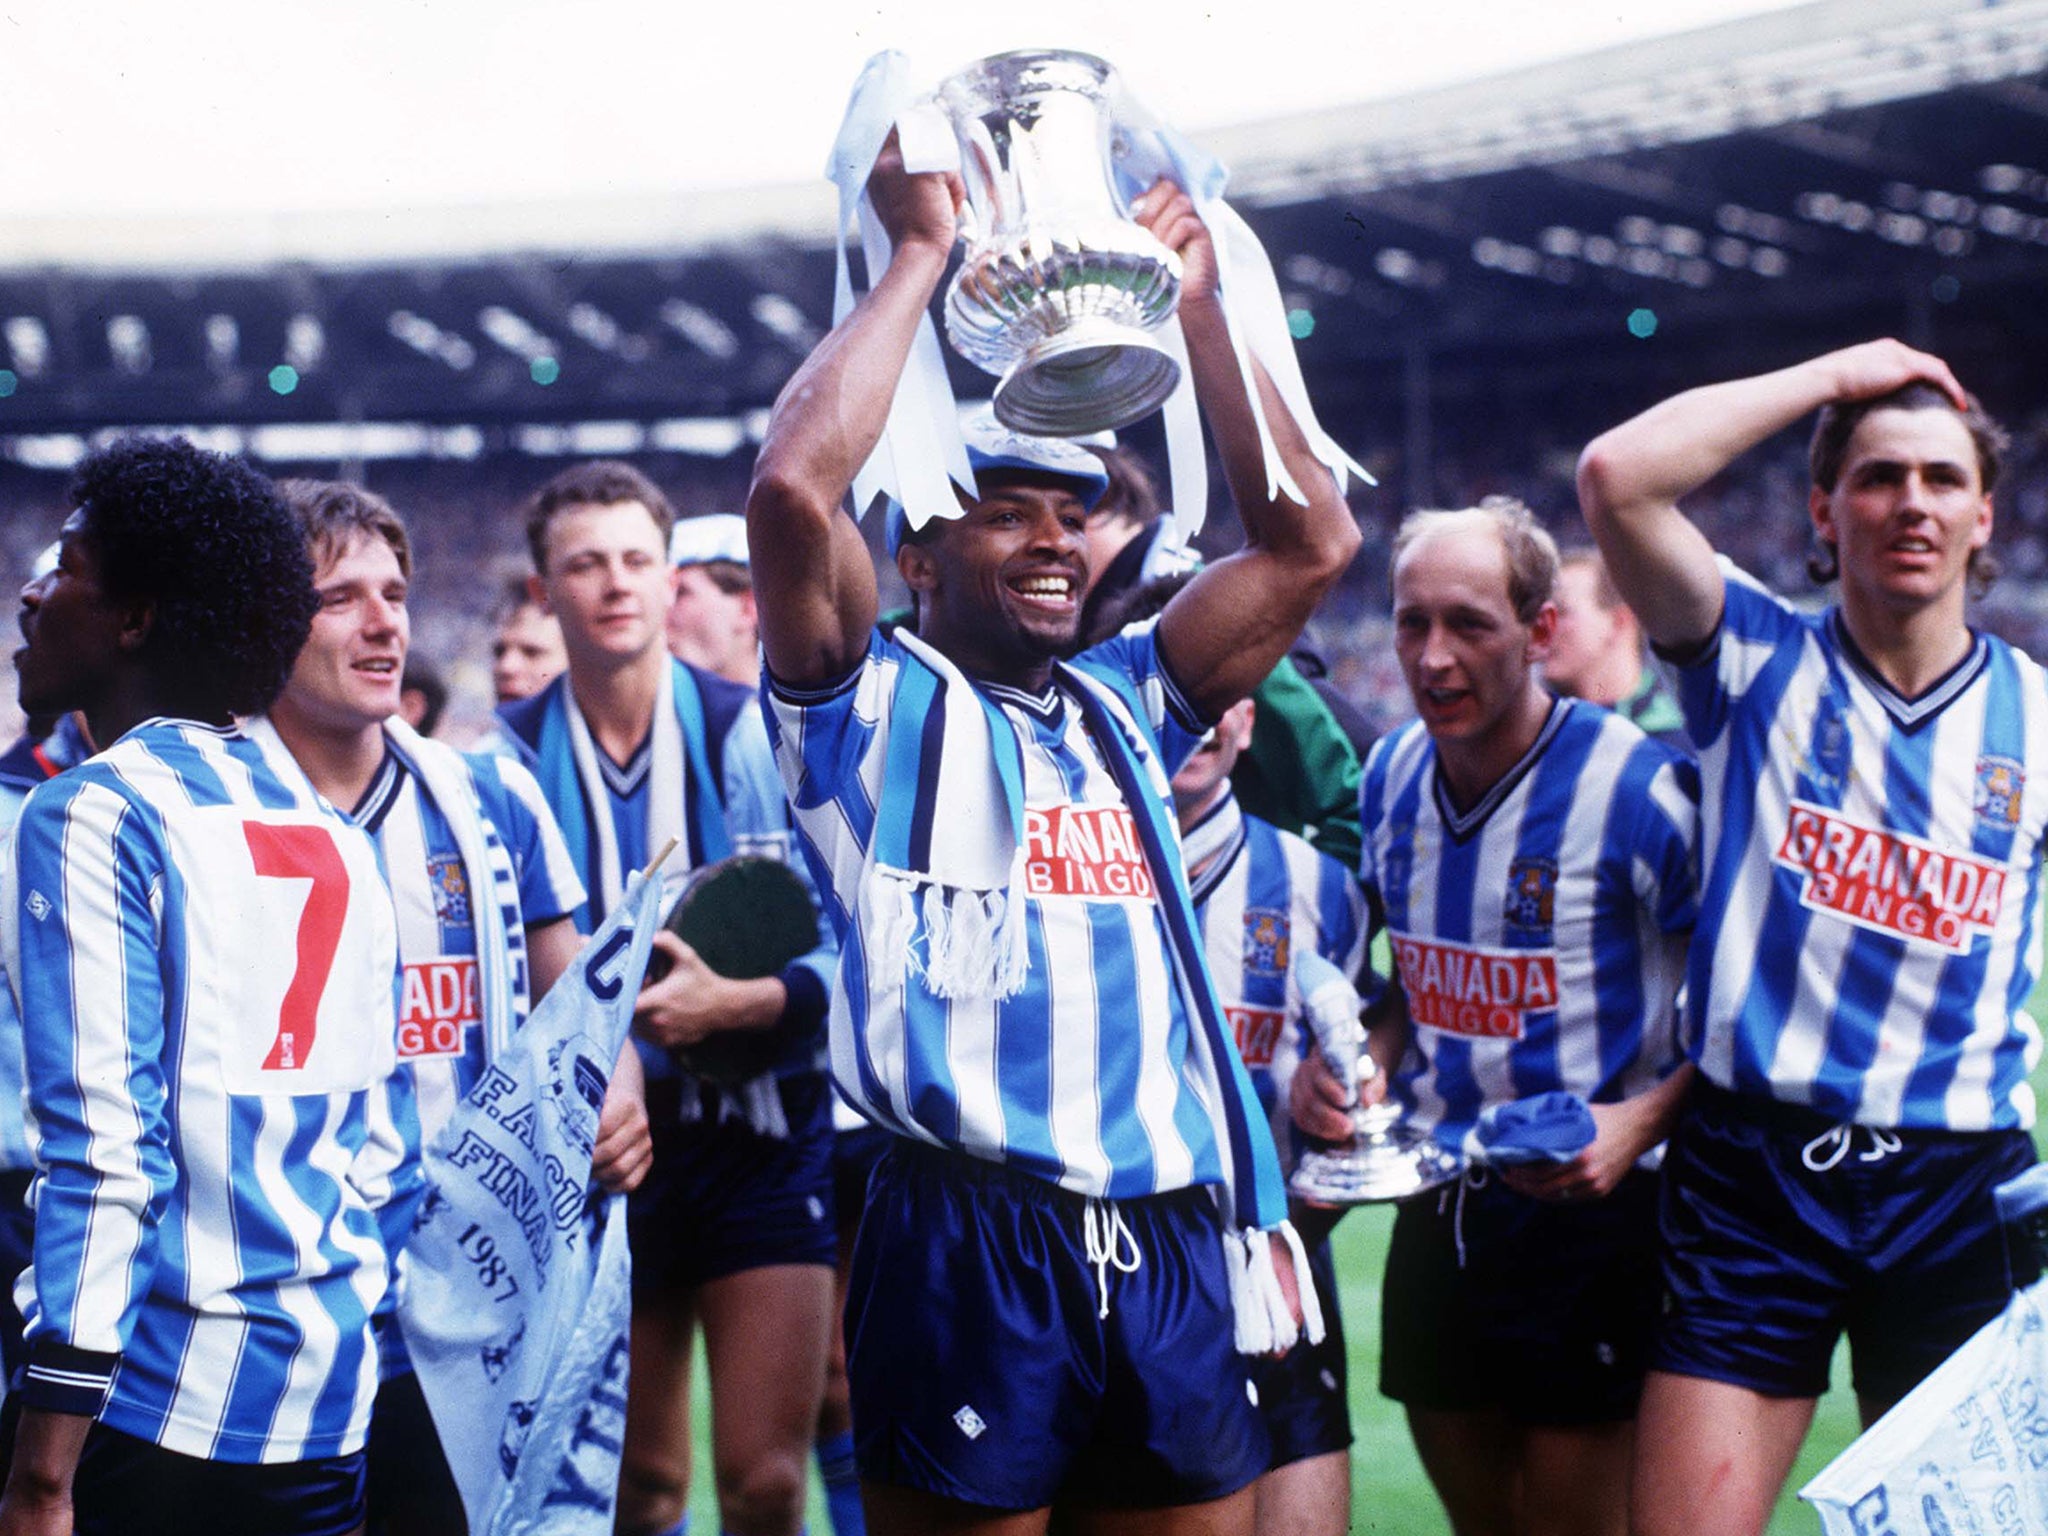 Regis lifts the FA Cup in 1987 after Coventry City beat Tottenham Hostpur 3-2